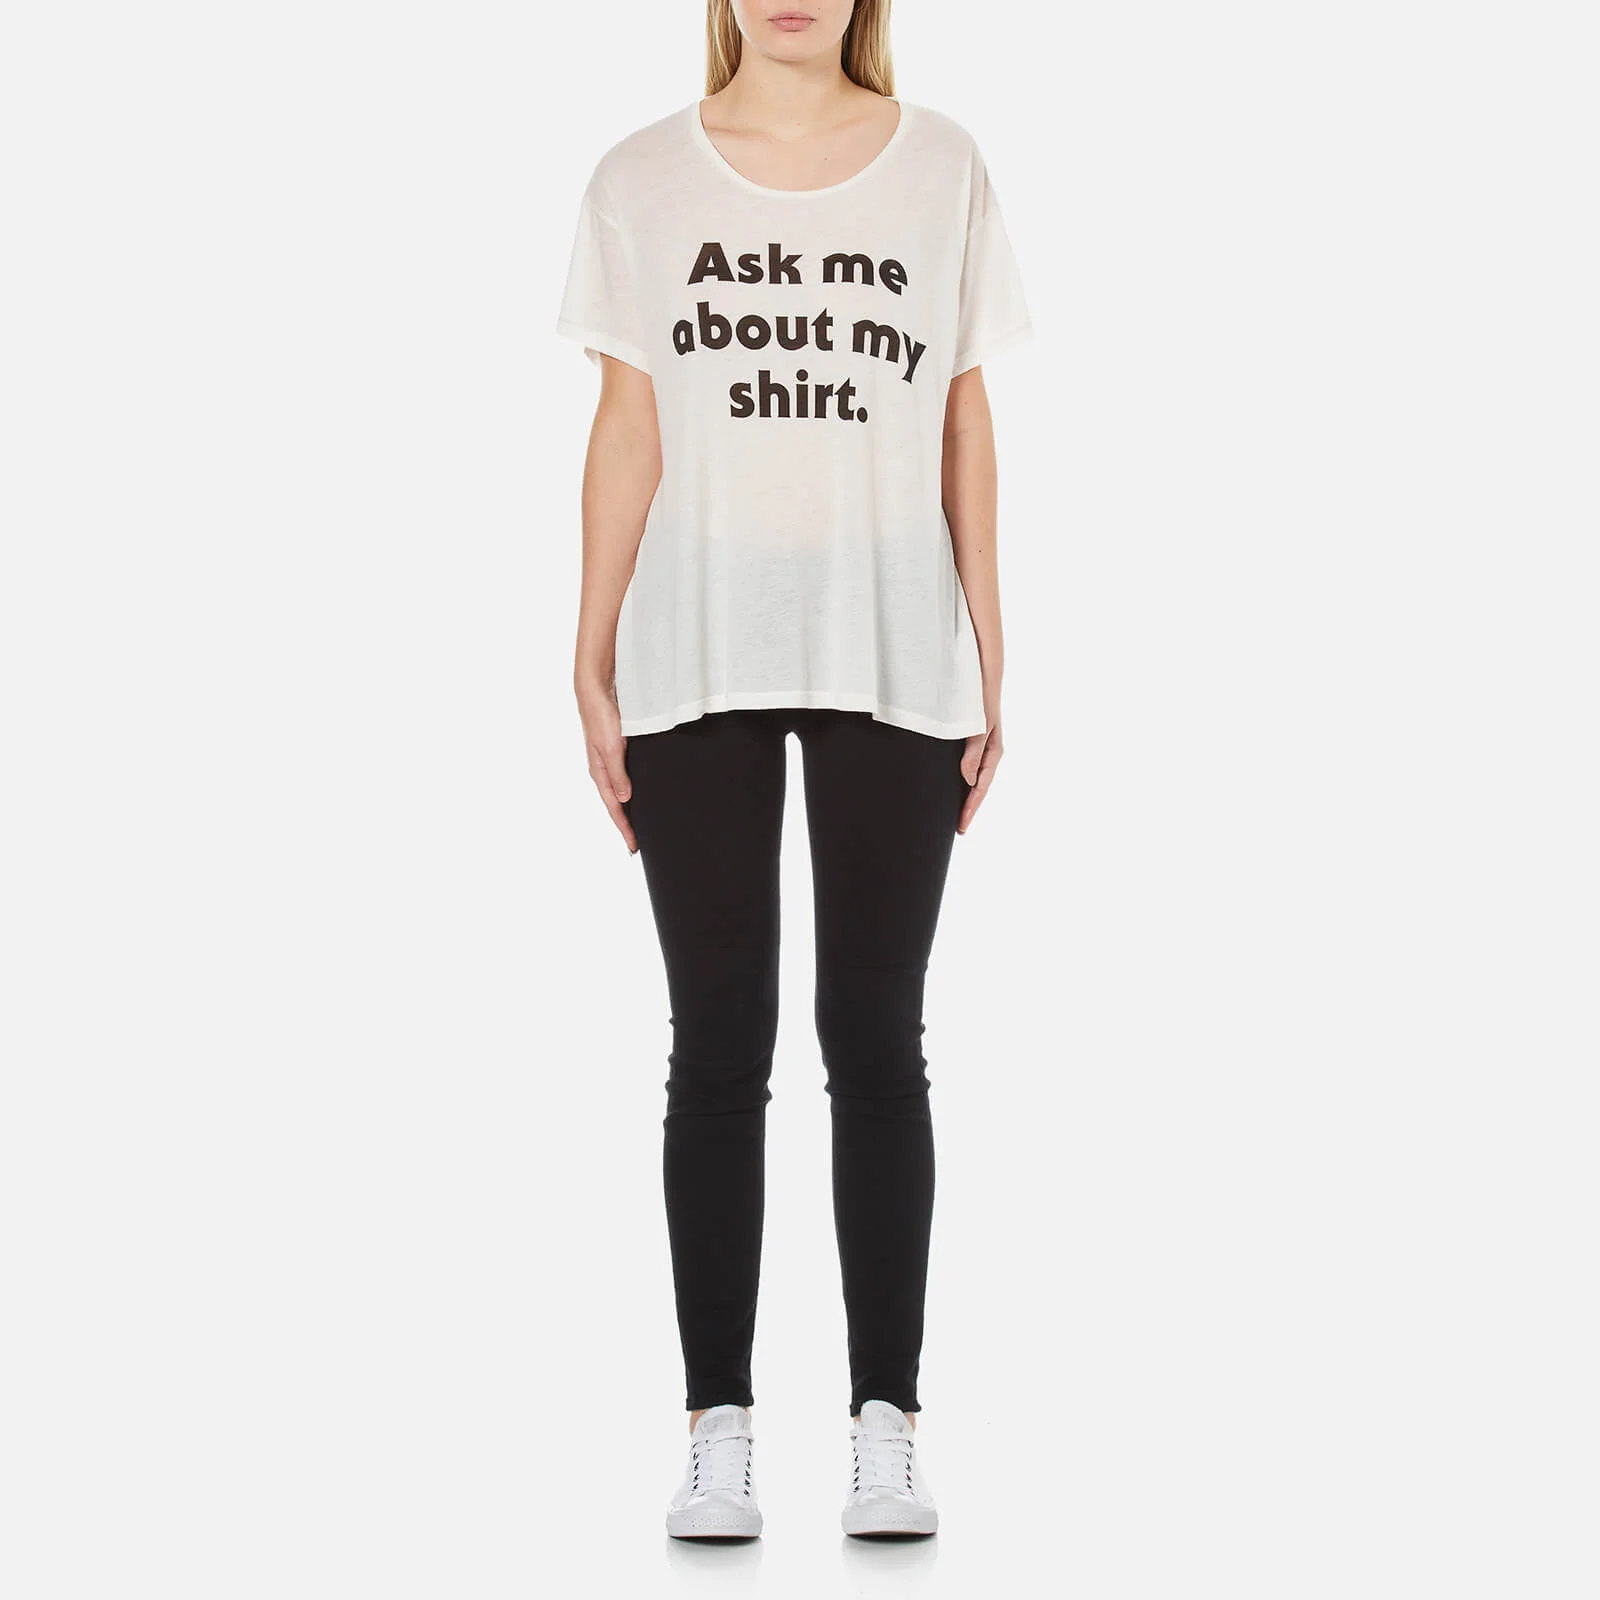 Wildfox Women's Ask Me About My Shirt T-Shirt - Alabaster Image 1